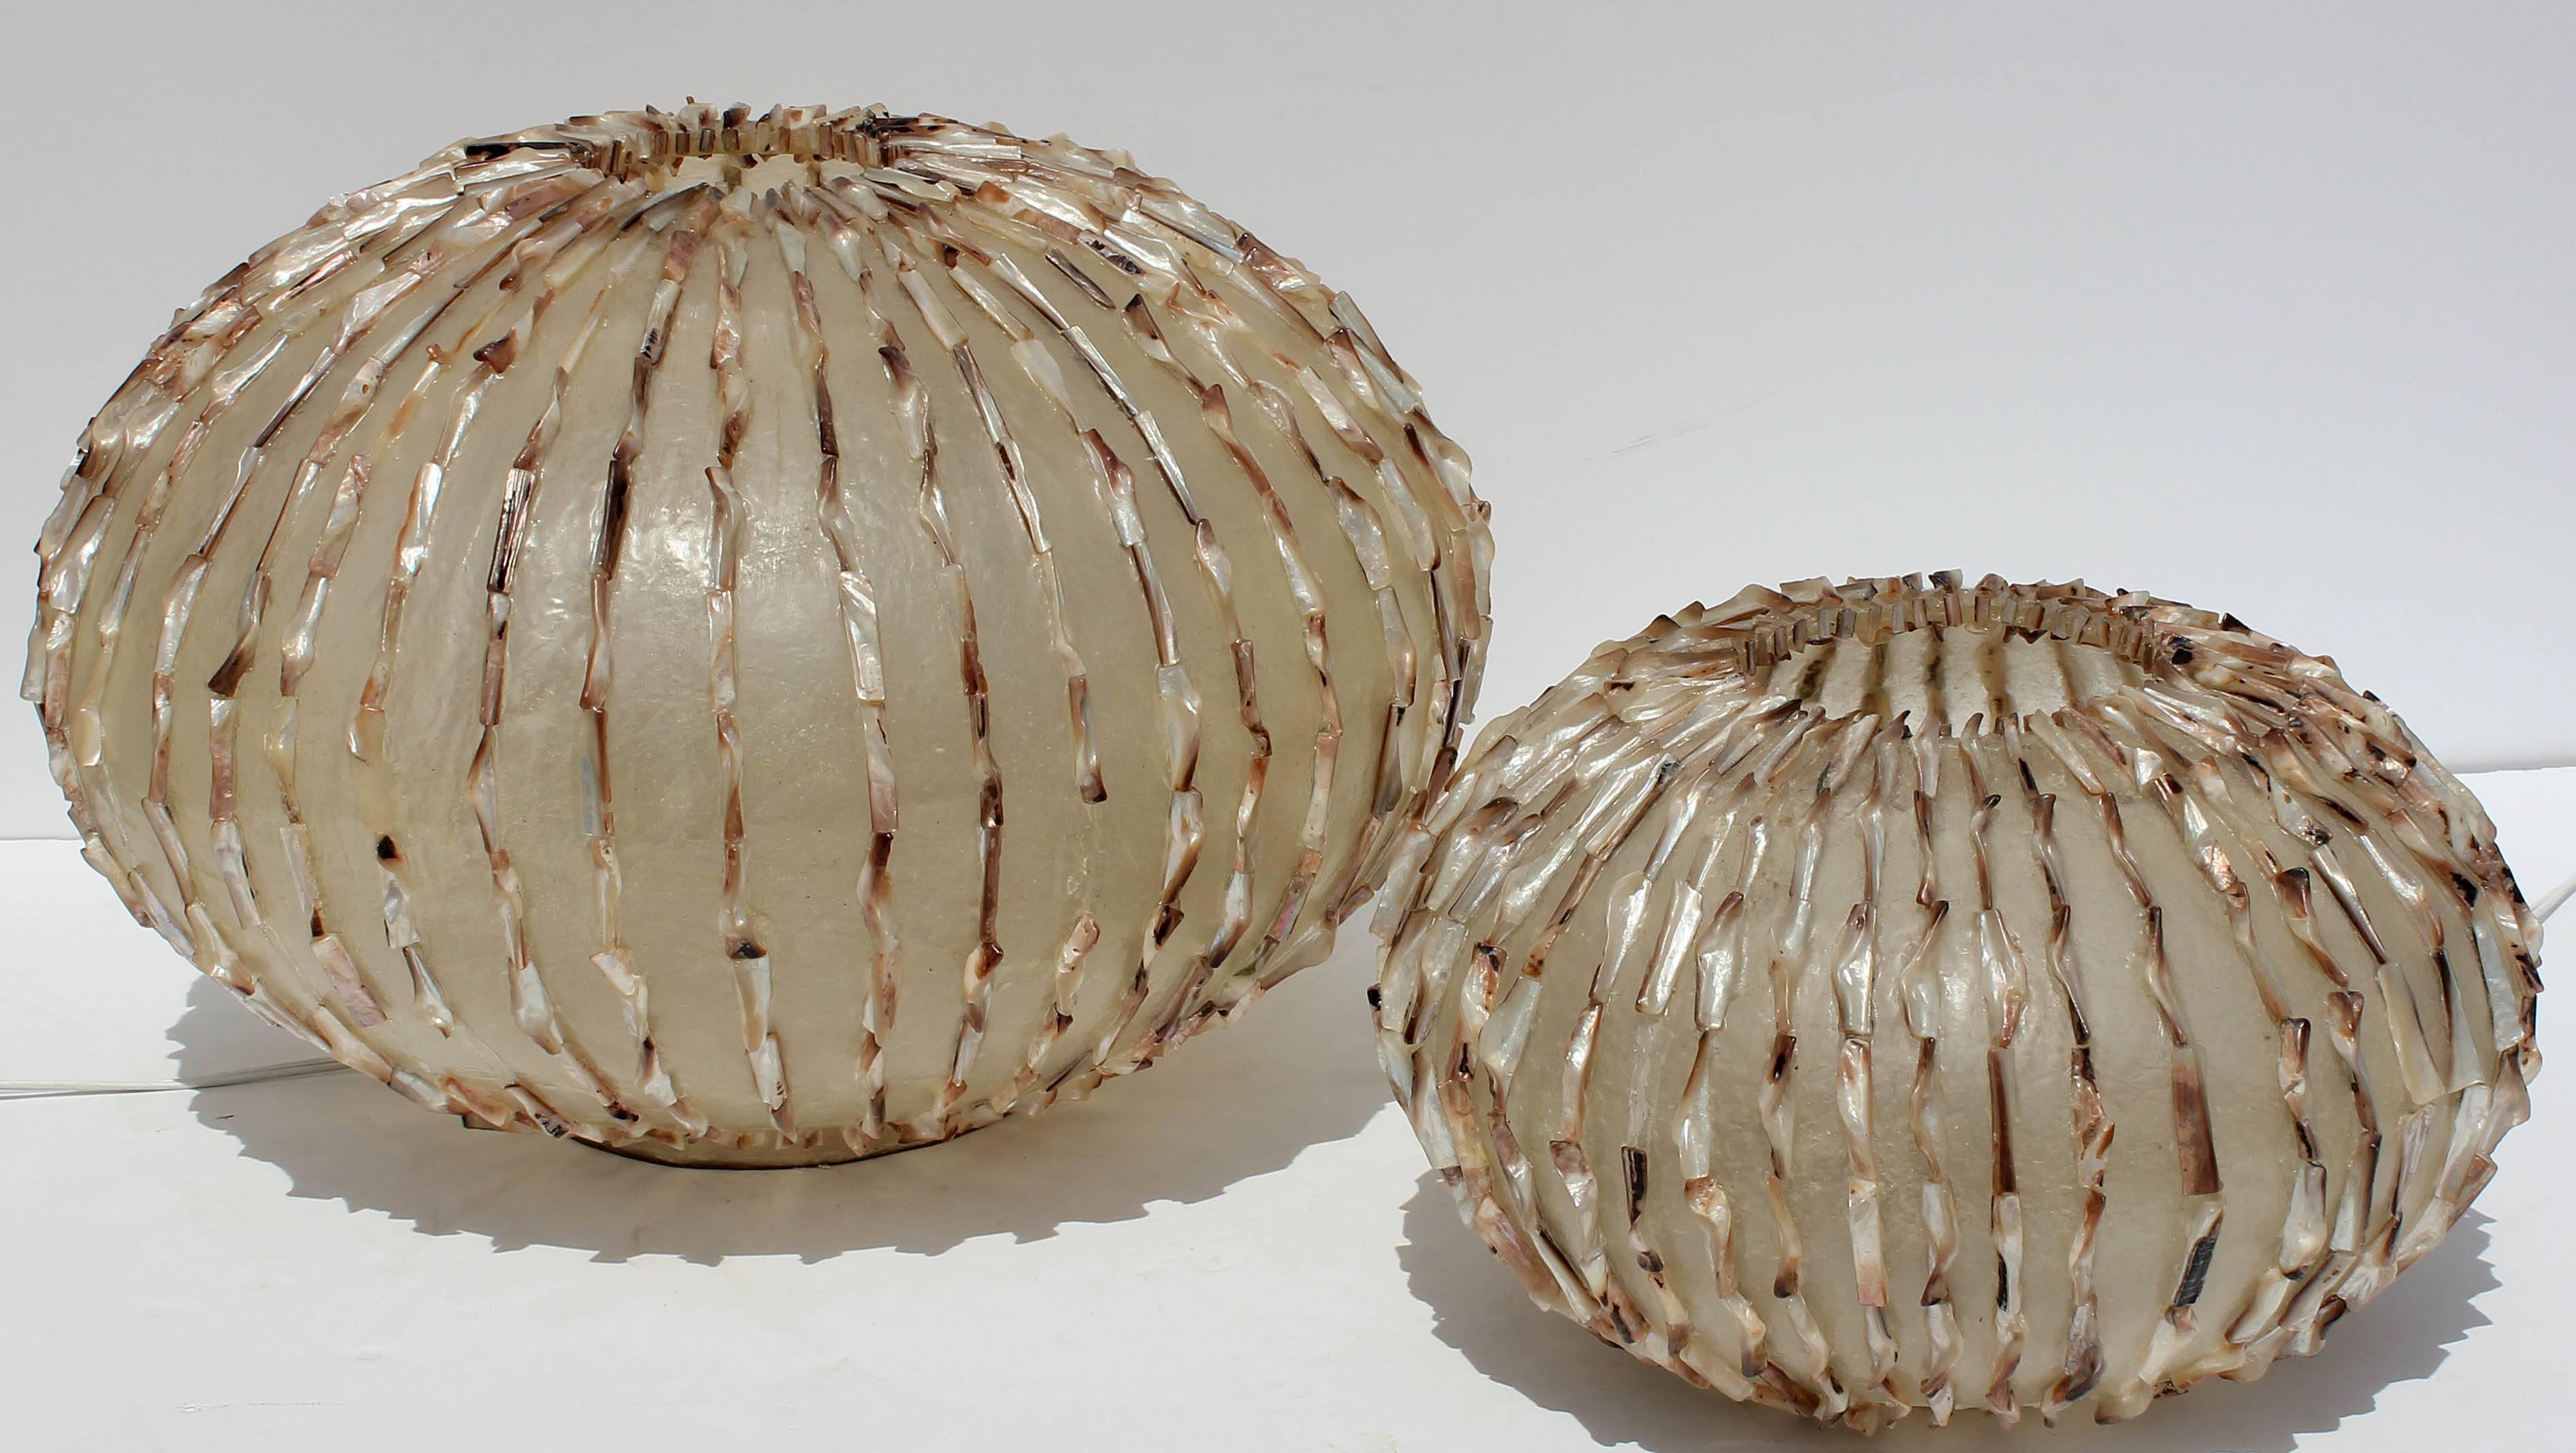 Two unique vintage Mid-Century Modern fiberglass and natural shell globe shaped table lamps. Larger measures 22" diameter and 15" high. Smaller measures 16" diameter and 10" high. They have the potential to be converted to